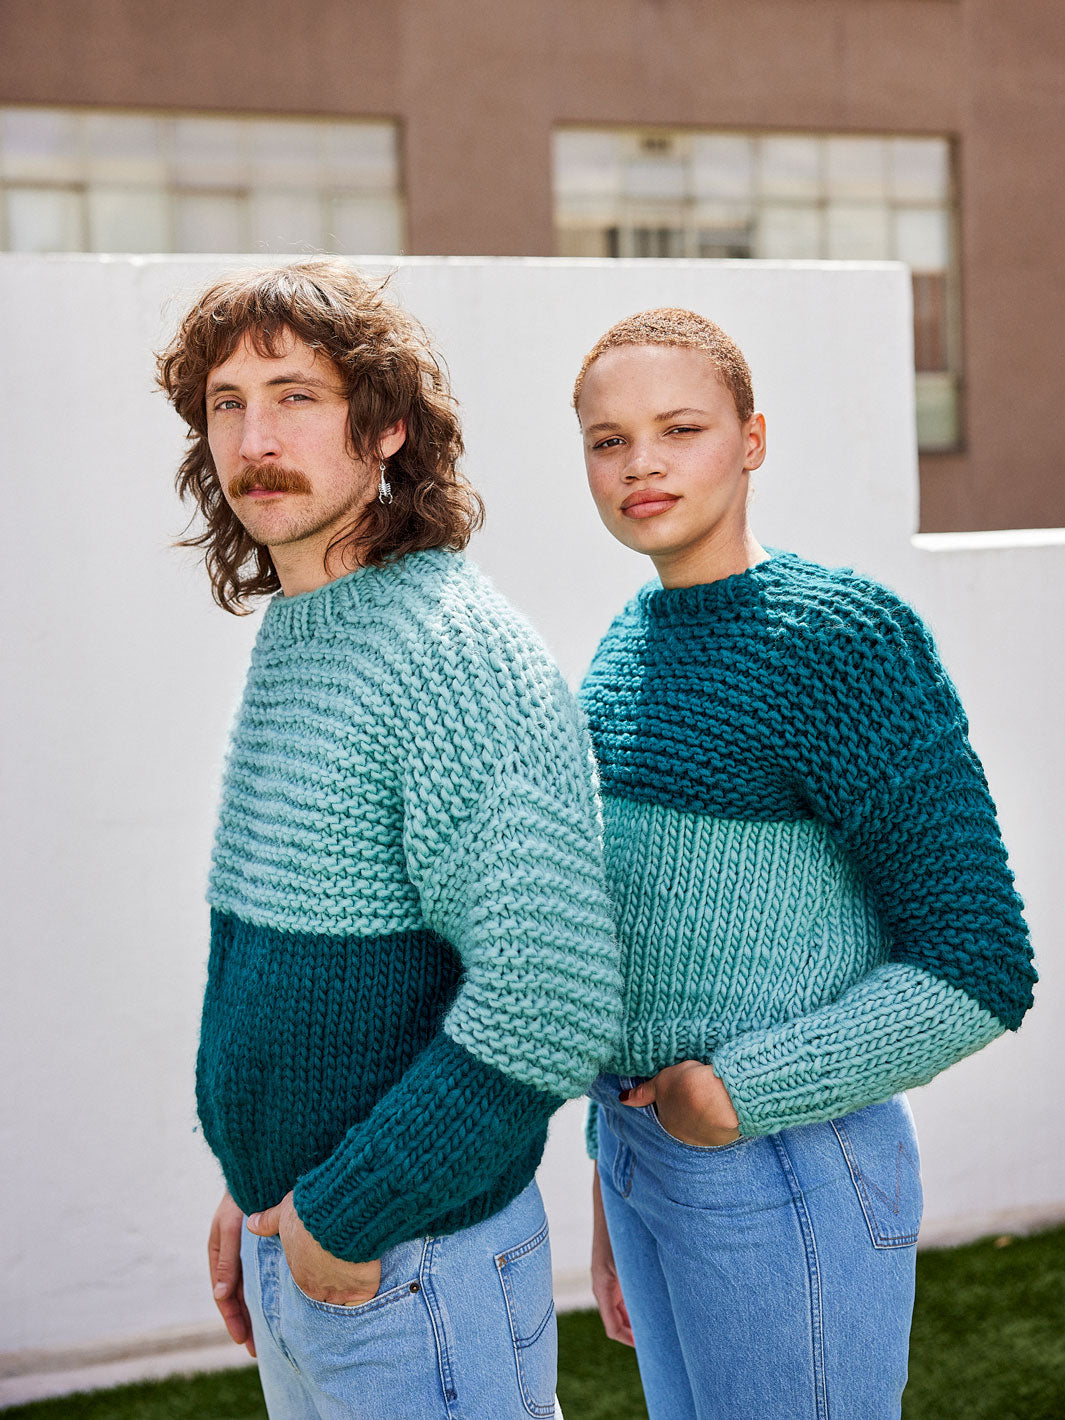 Man and woman wear matching chunky knit jumpers